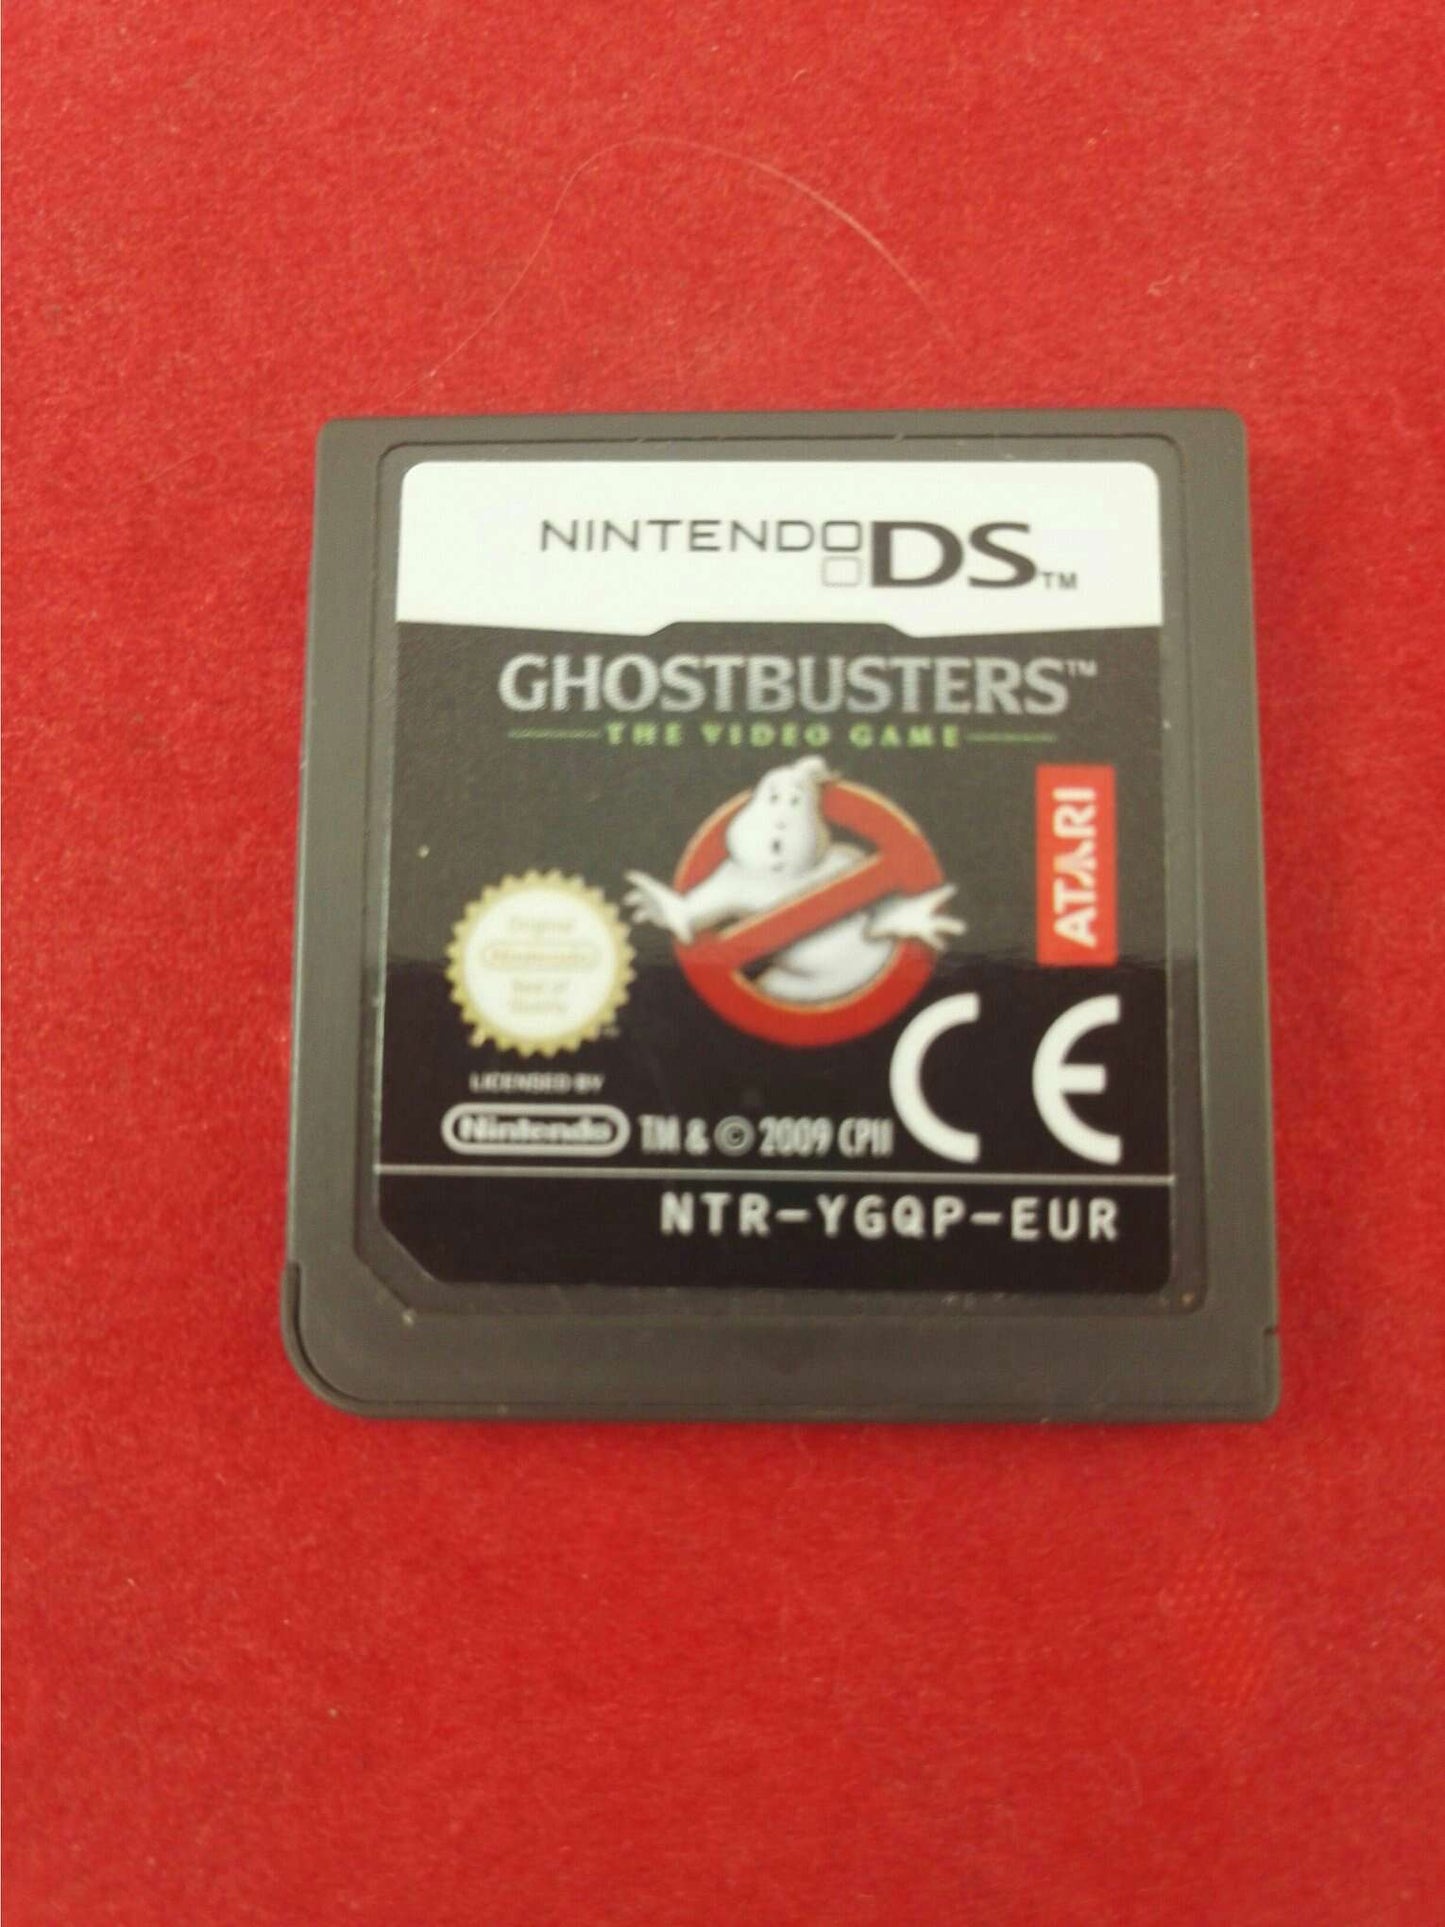 Ghostbusters Nintendo DS Game Cartridge Only